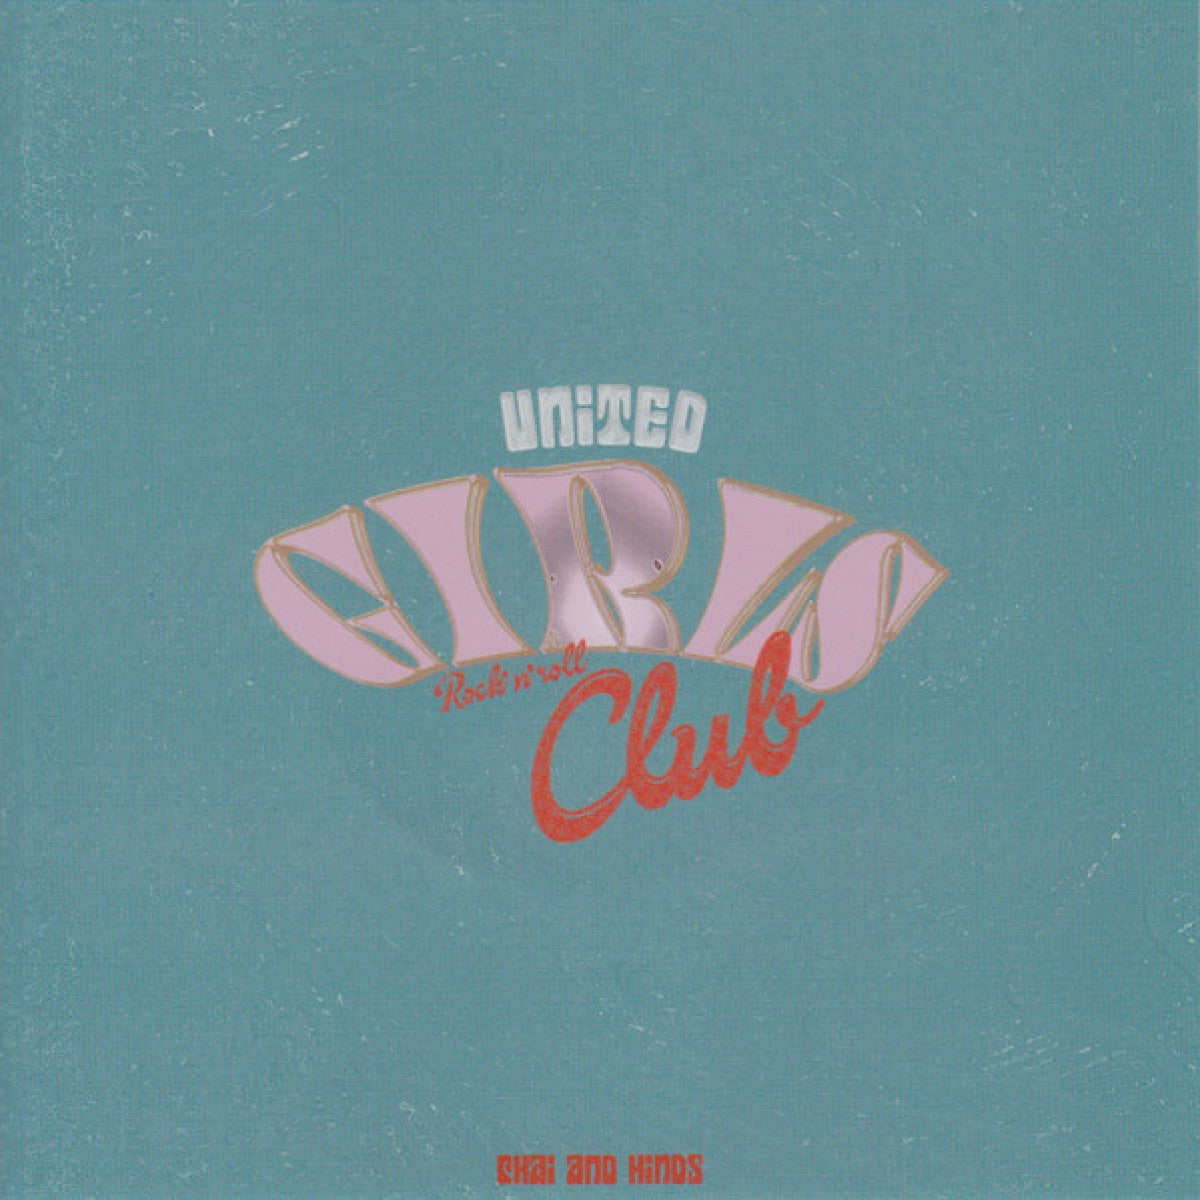 CHAI AND HINDS - United Girls Rock 'n' Roll Club - 7" - Limited Transparent Violet Vinyl